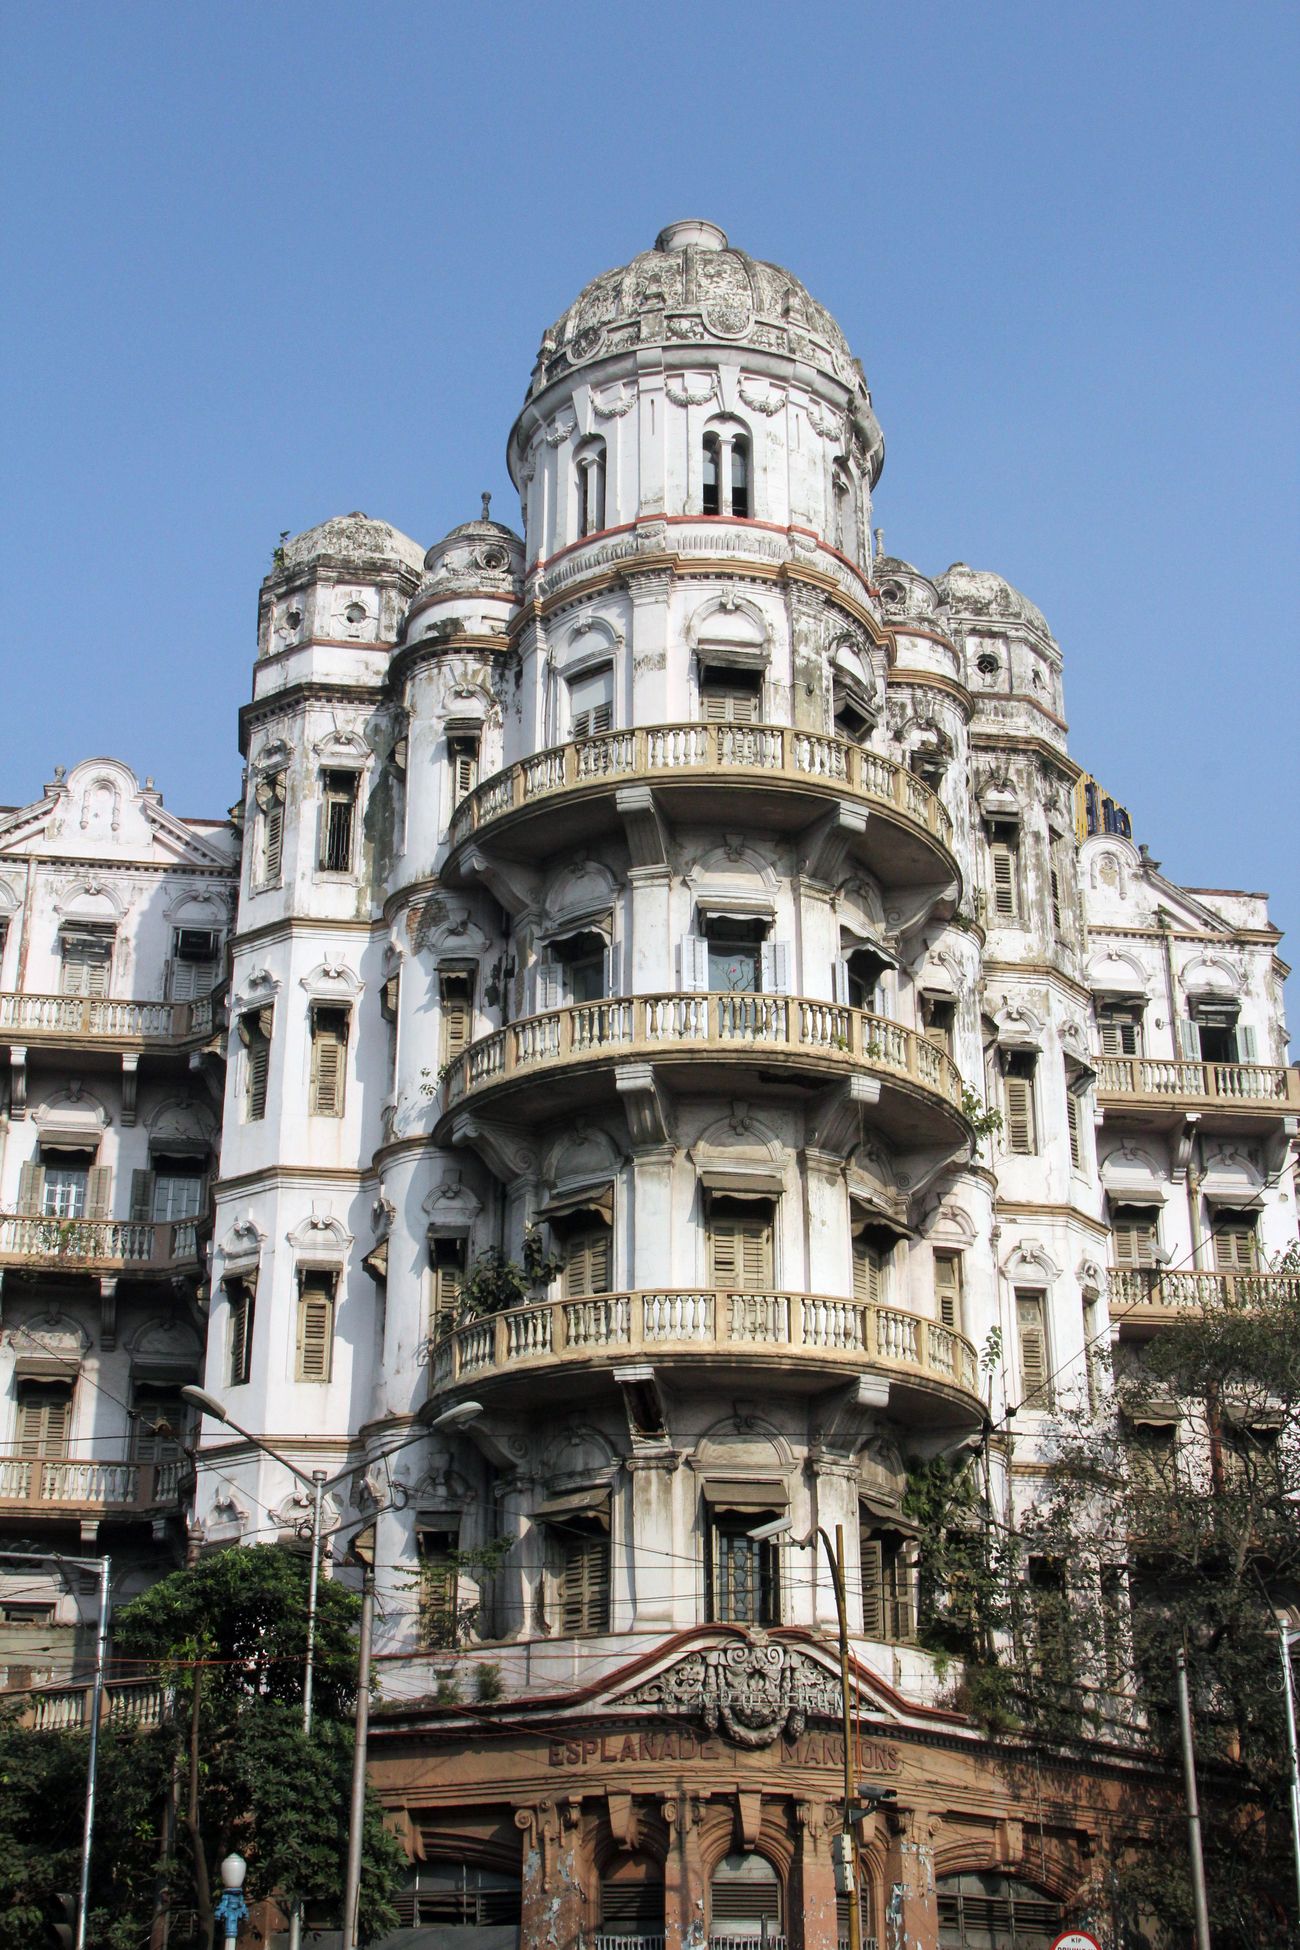 The facade of the illustrious Esplanade Mansion, constructed during the colonial era, in Kolkata, West Bengal